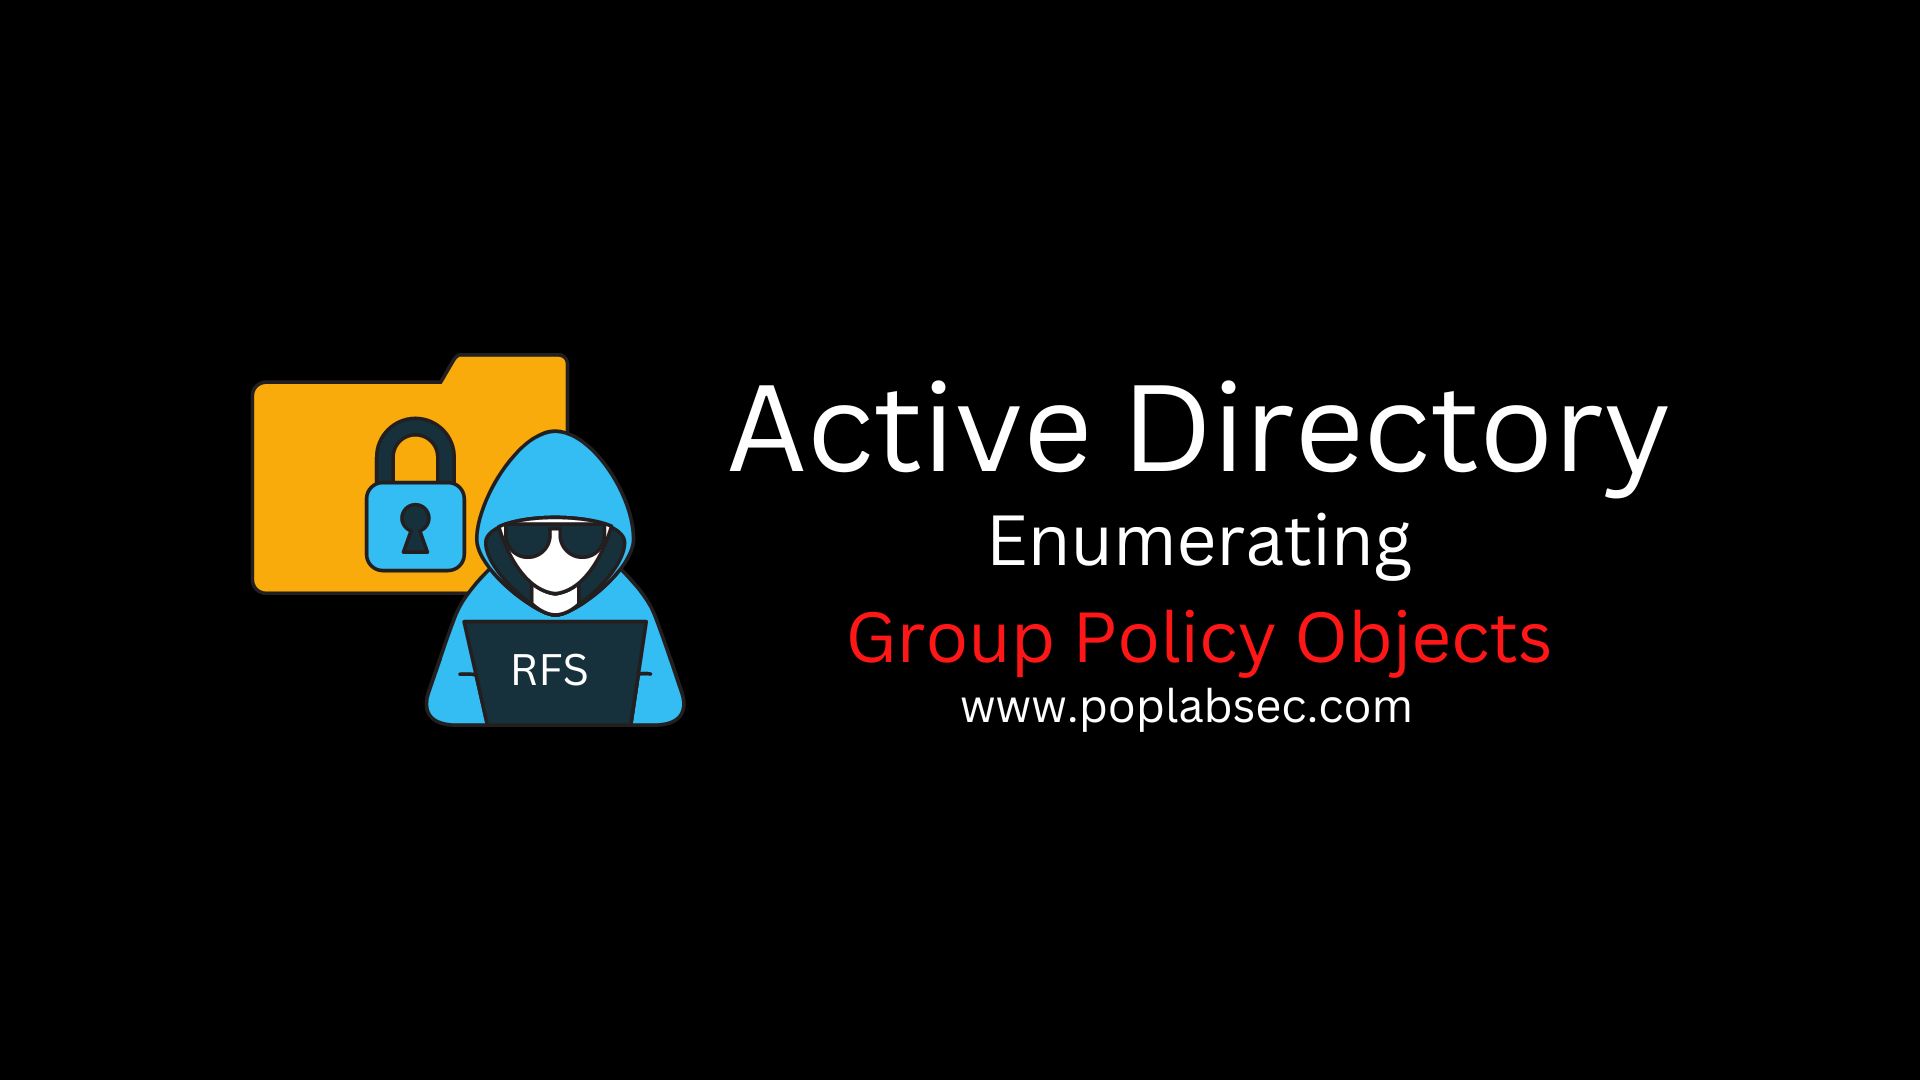 Active Directory: Enumerate Group Policy Objects